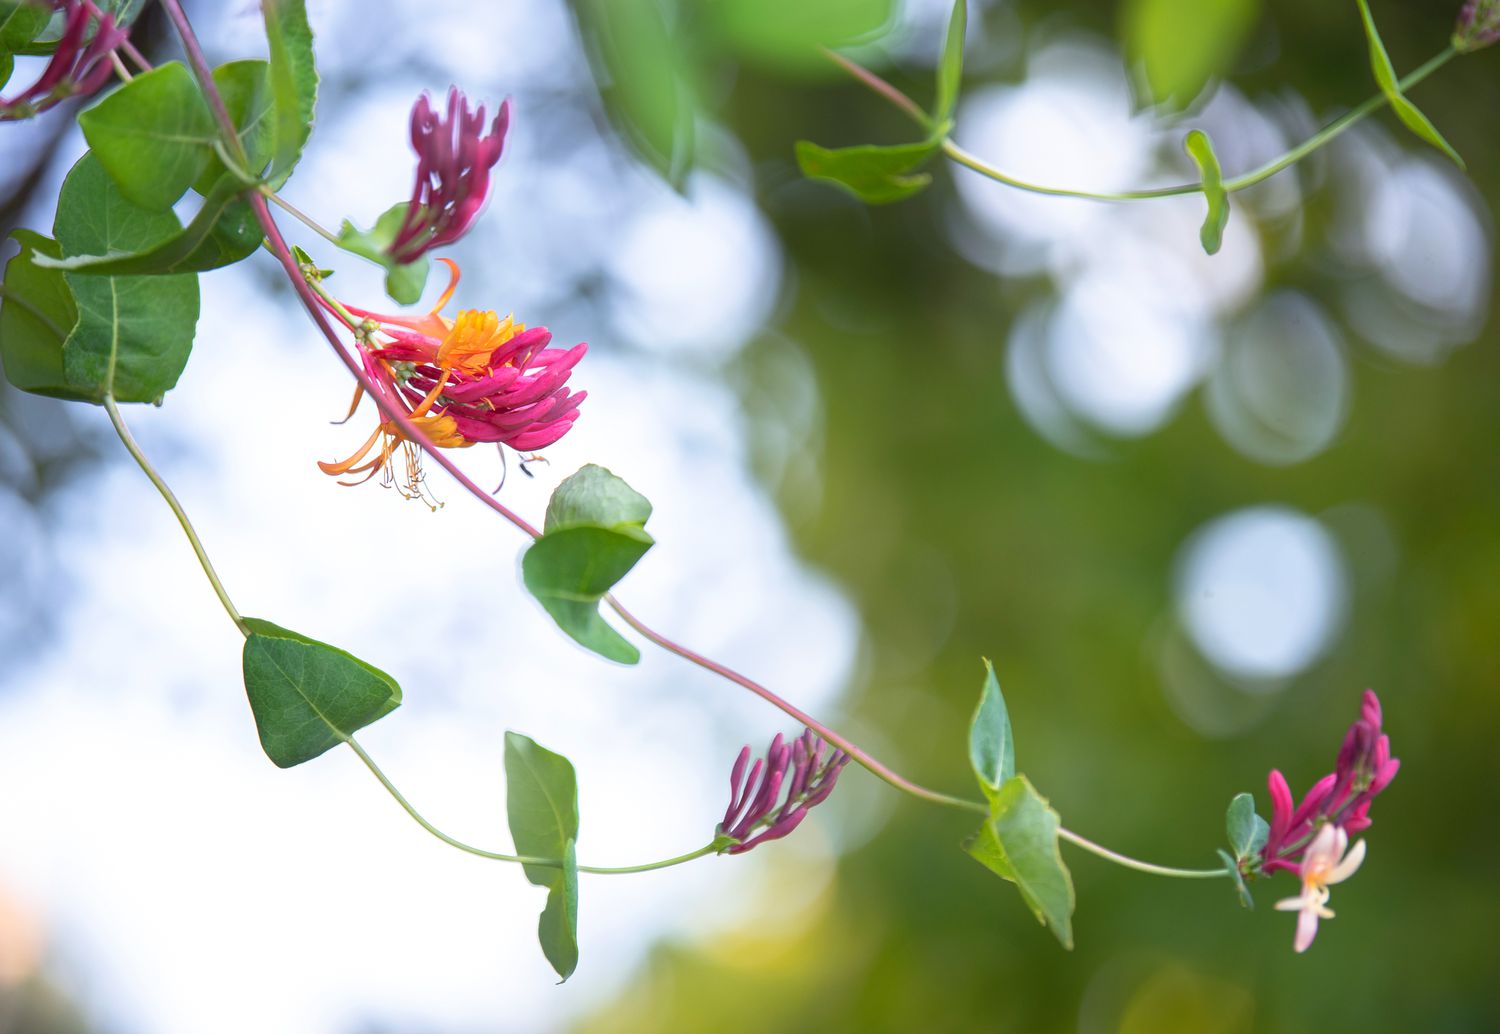 Common honeysuckle plant vine with tubular pink and orange flowers and leaves closeup